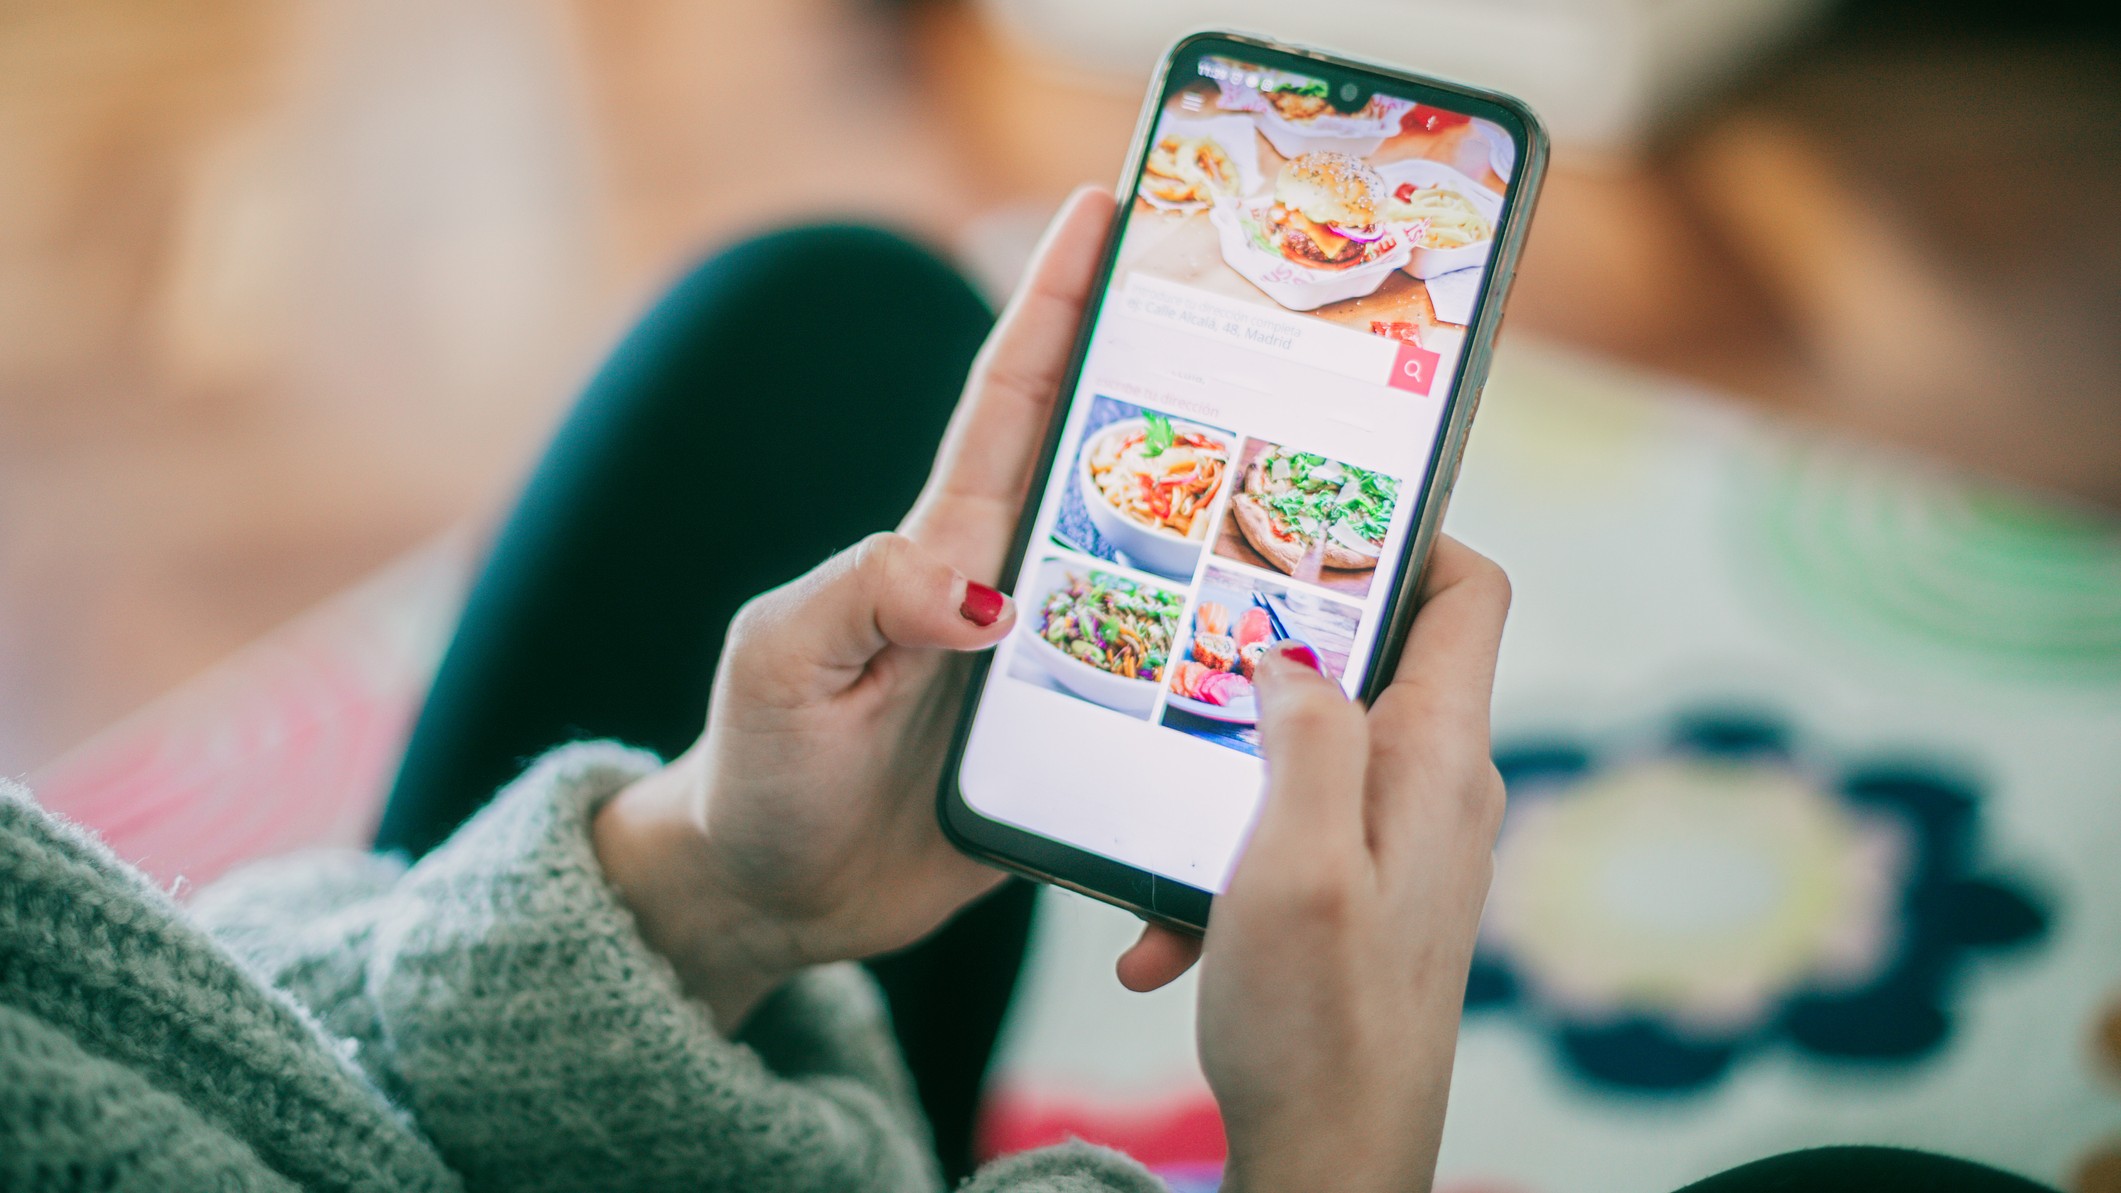 Too Good To Go: End Food Waste on the App Store